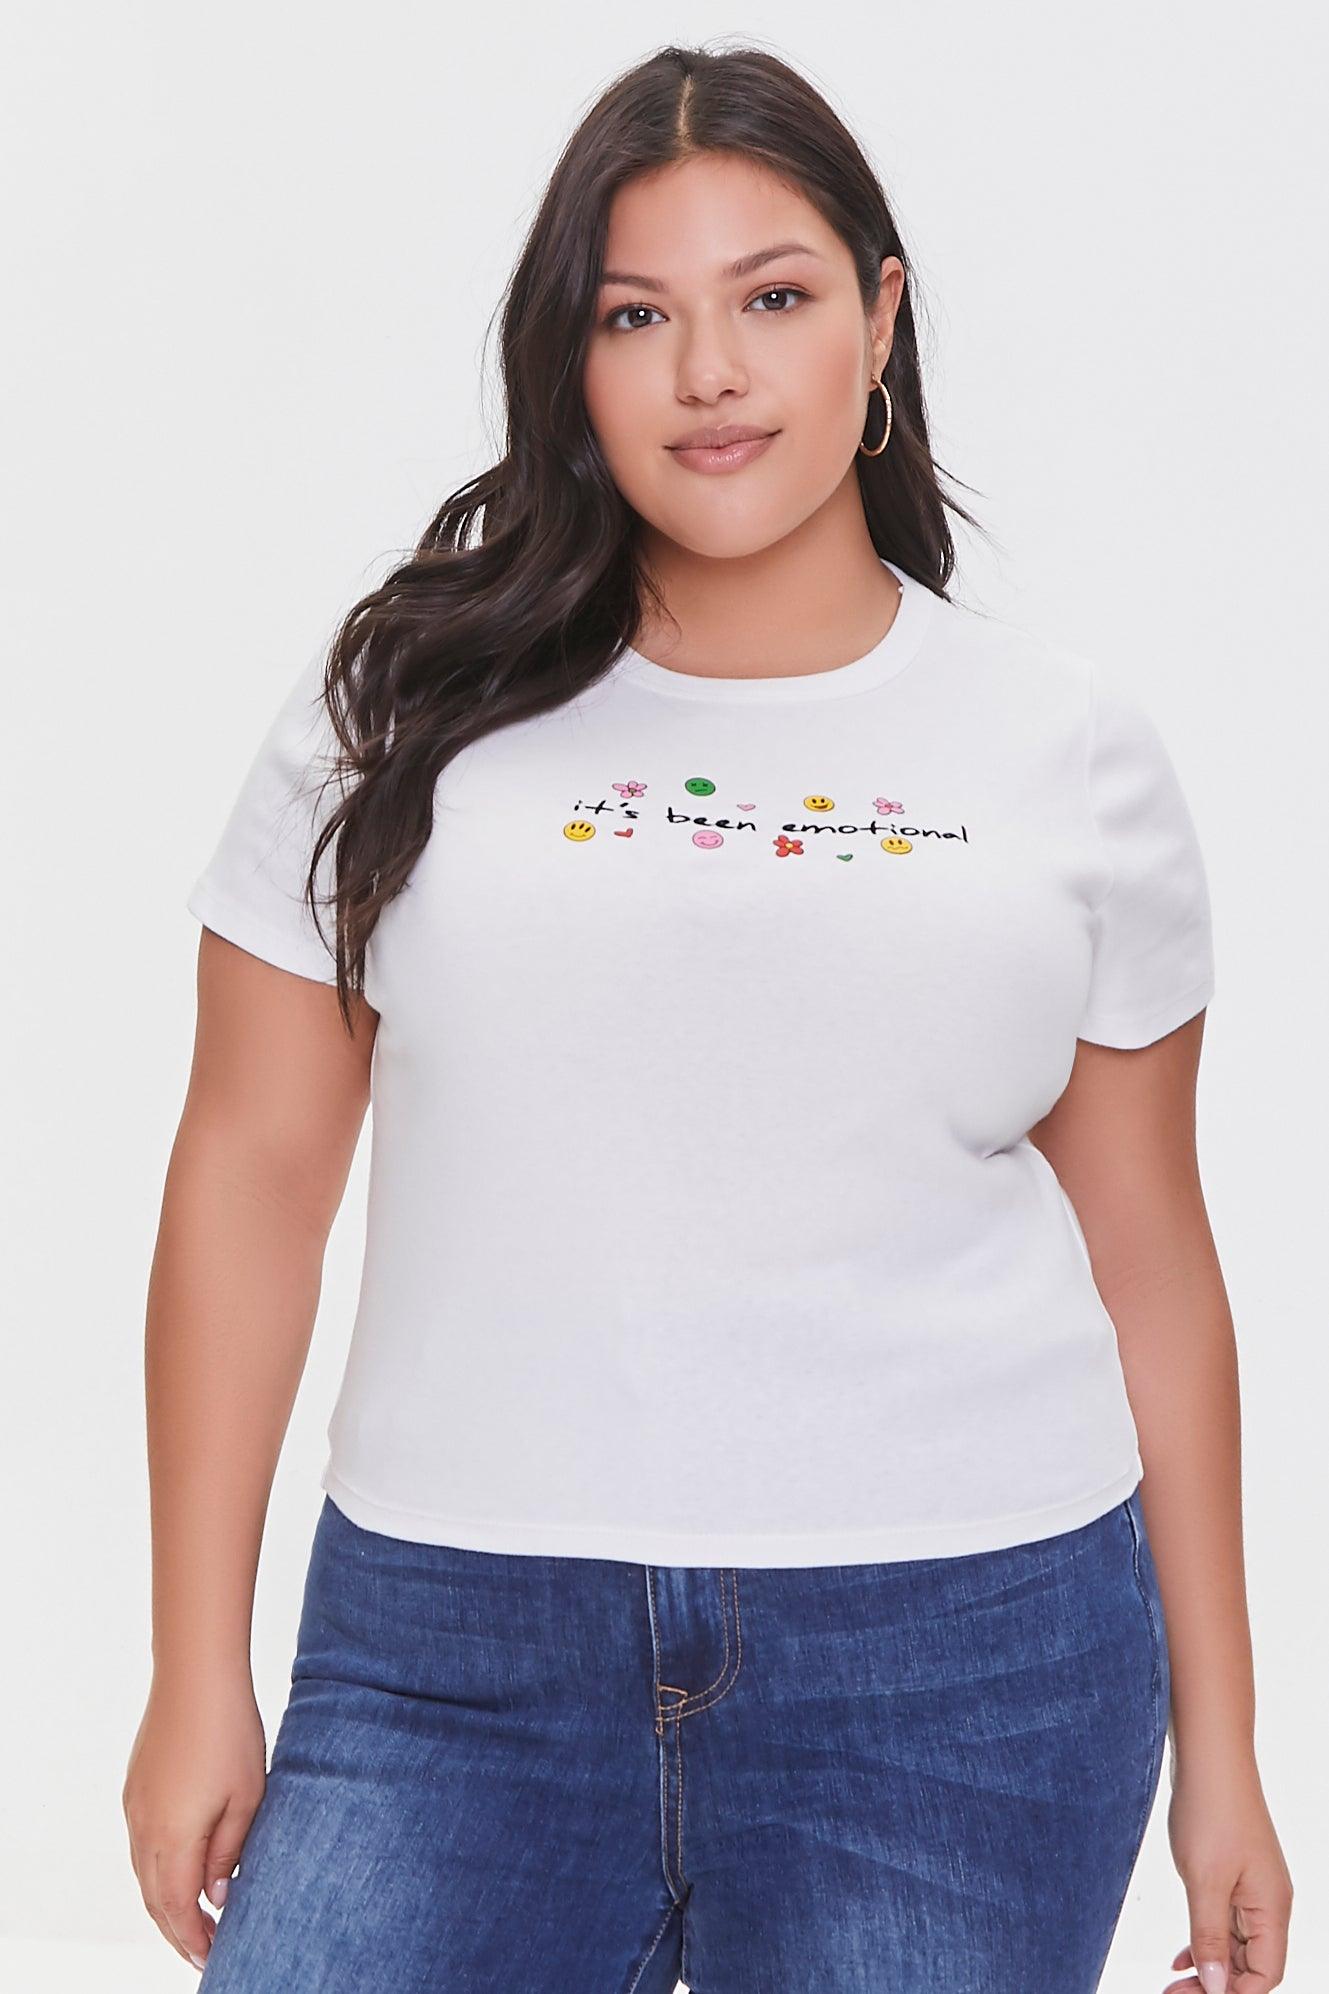 Whitemulti Plus Size Its Been Emotional Tee 1